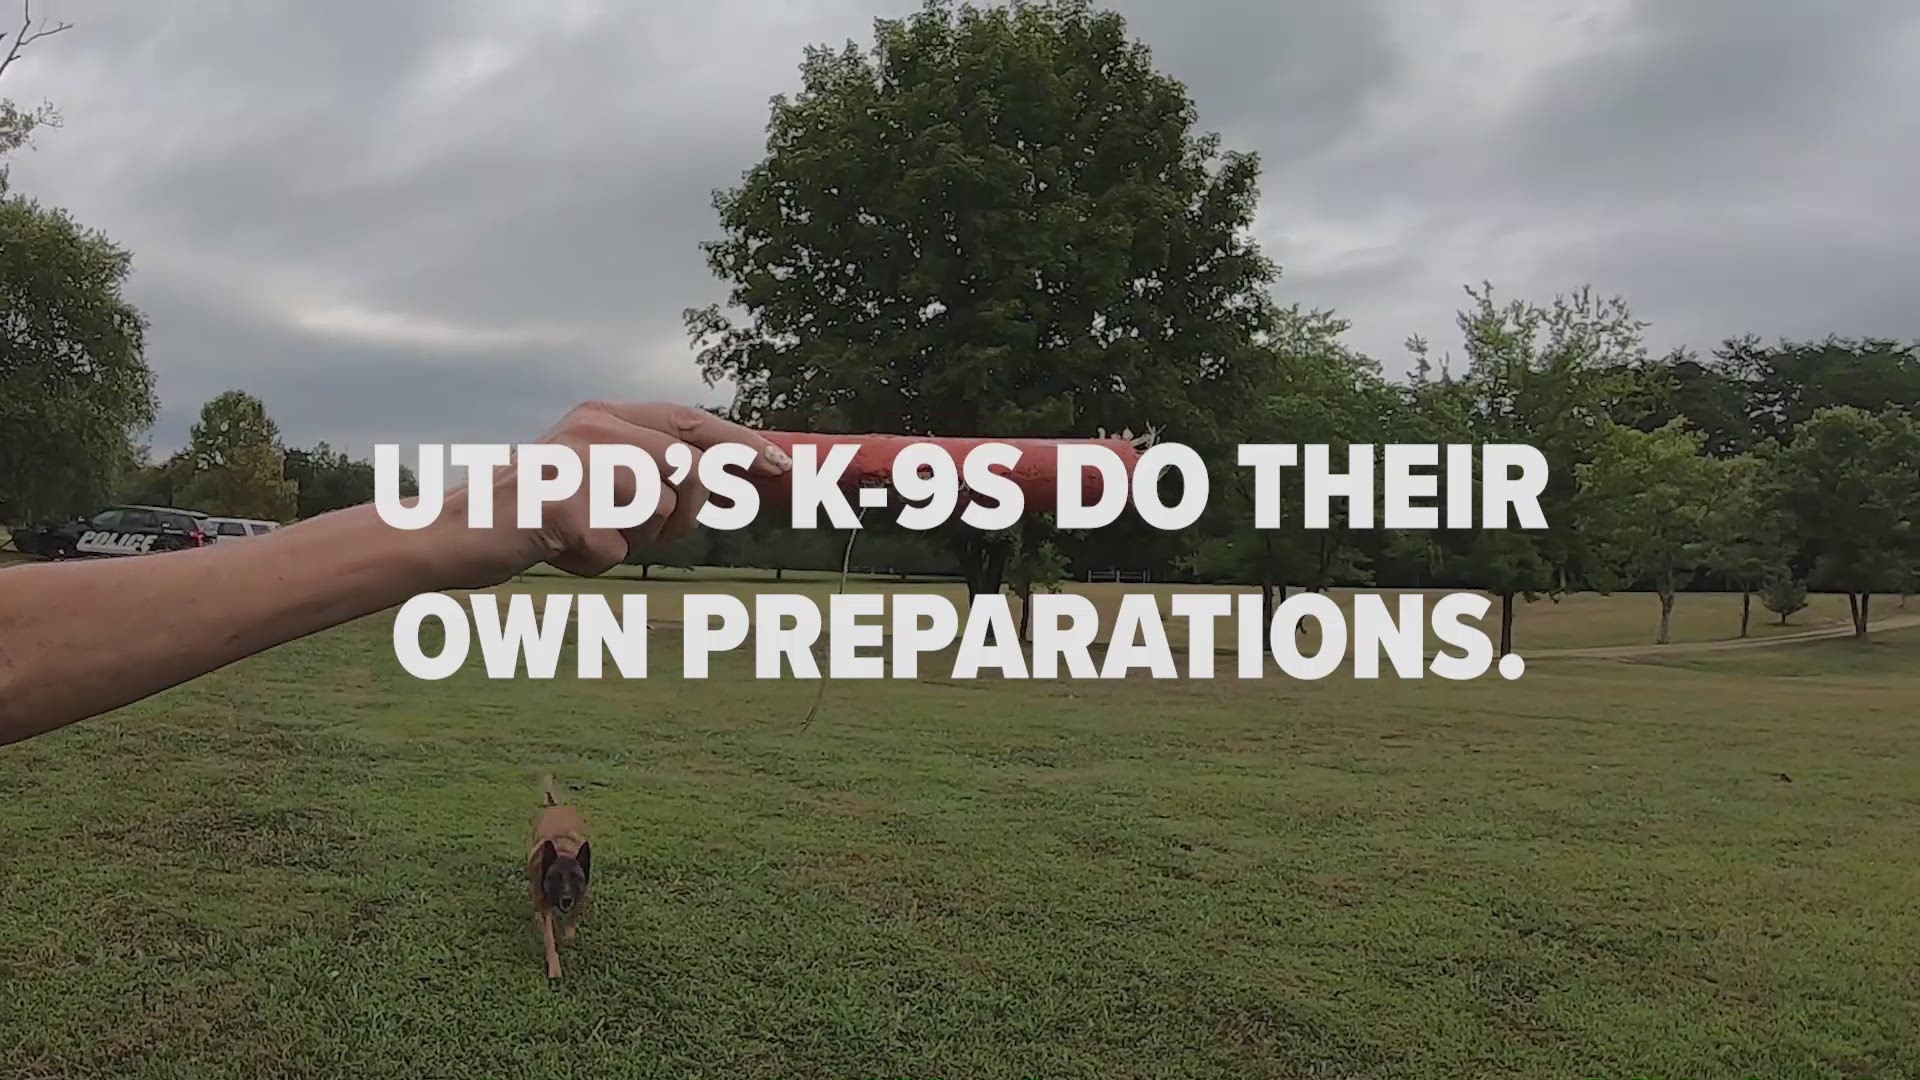 While the Vols practice for game days, these K-9s train to make sure security is a win every Saturday.